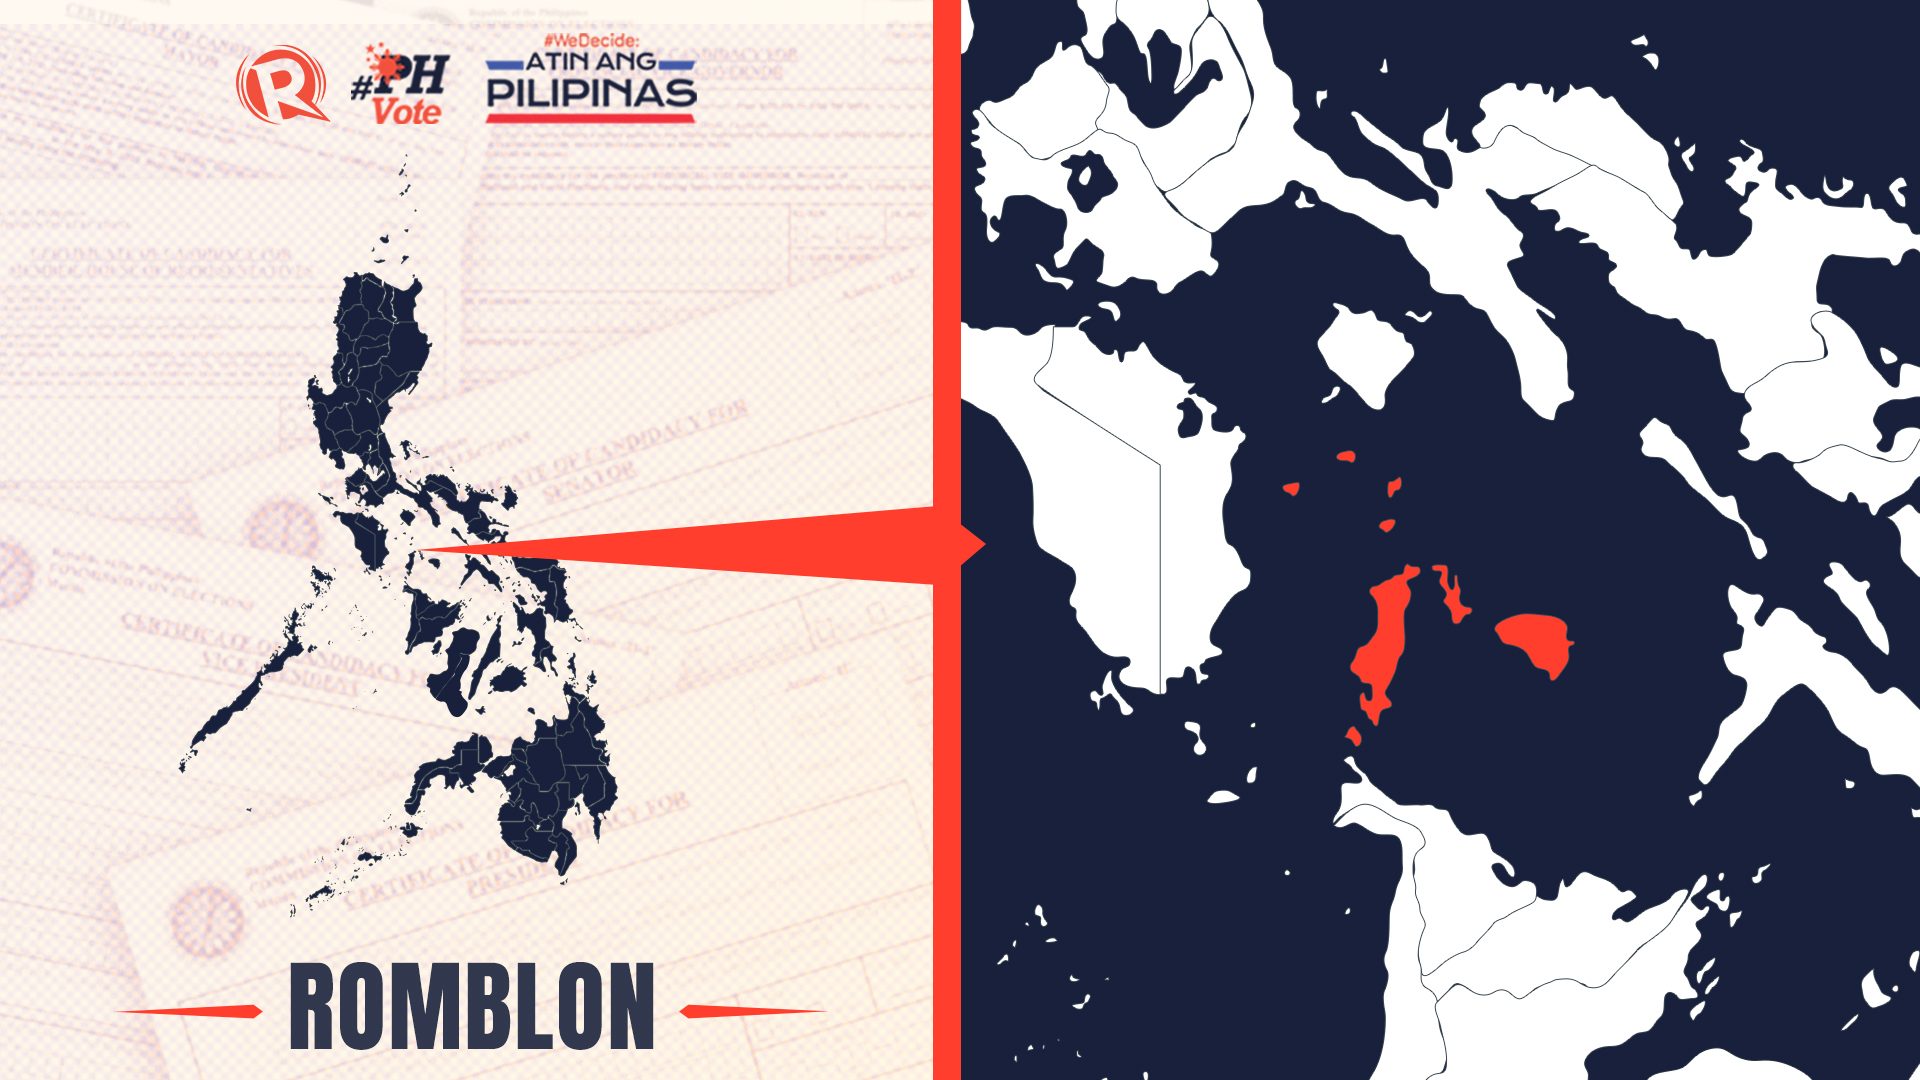 LIST: Who is running in Romblon in the 2022 Philippine elections?